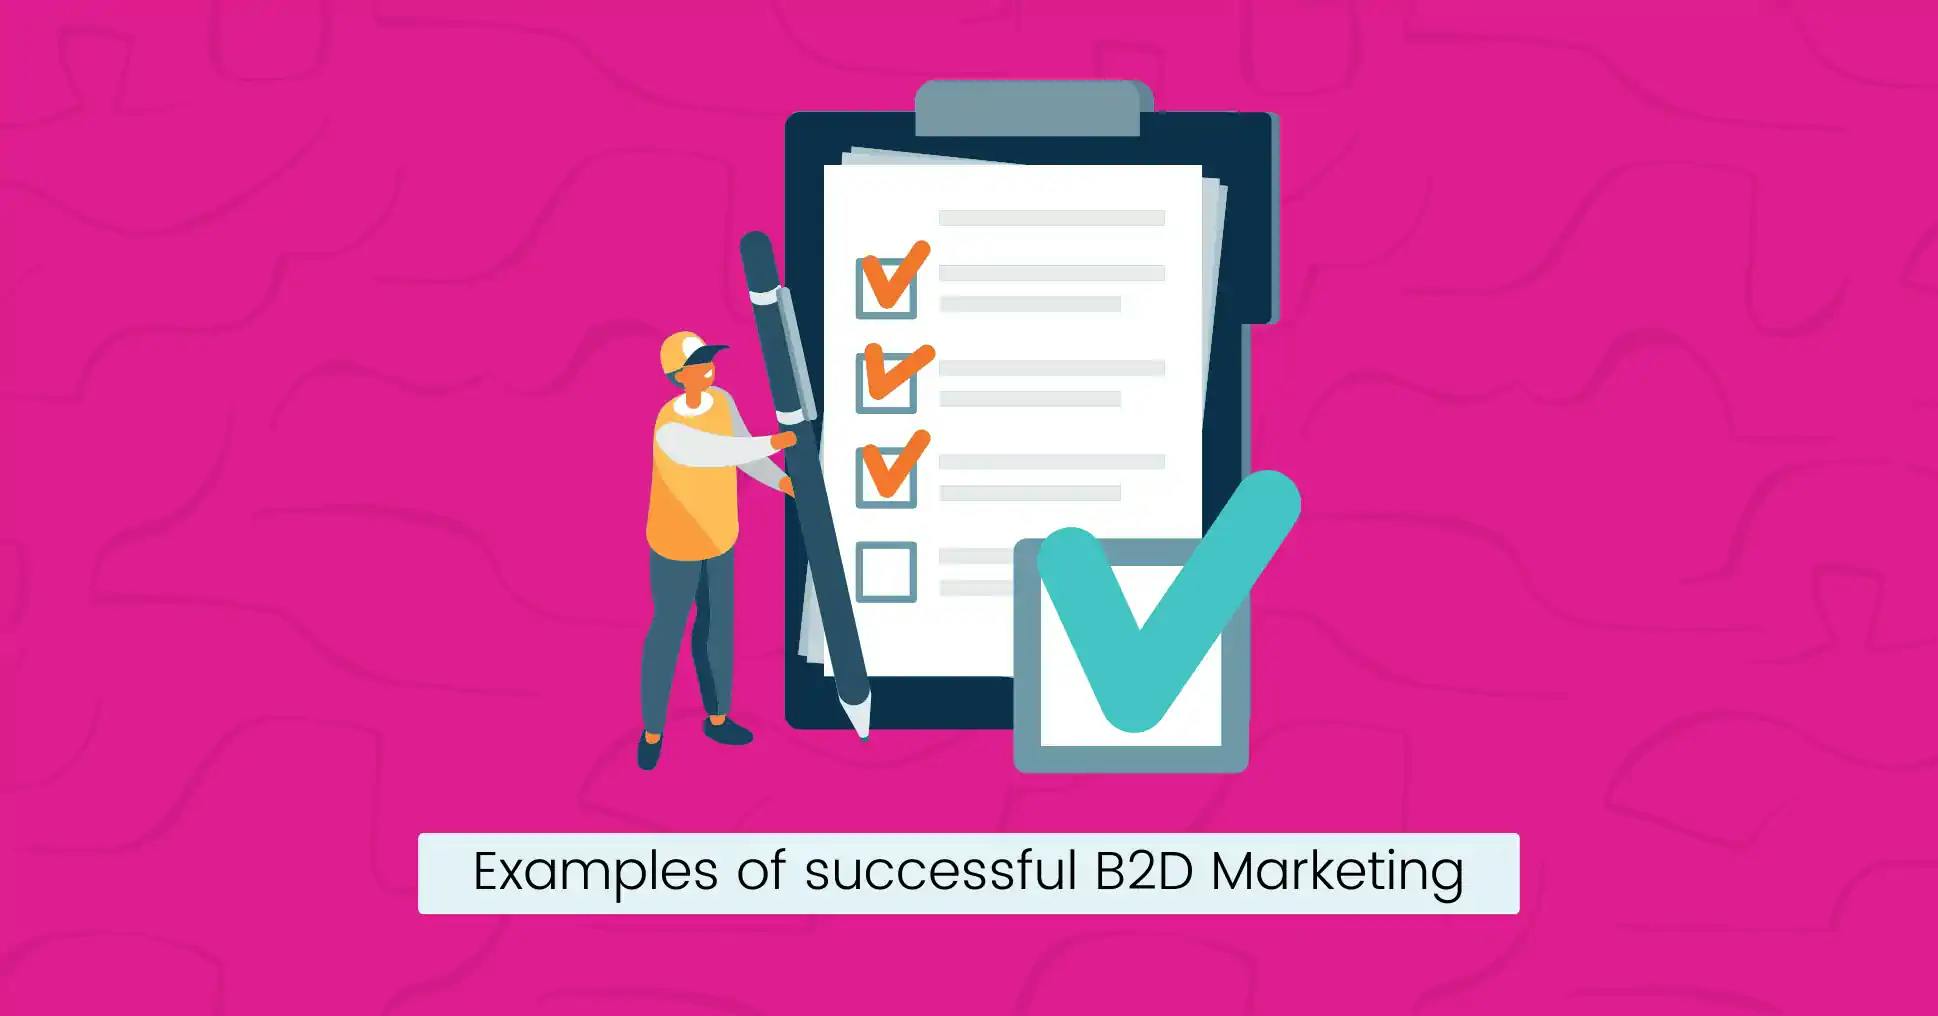 Examples of successful B2D marketing